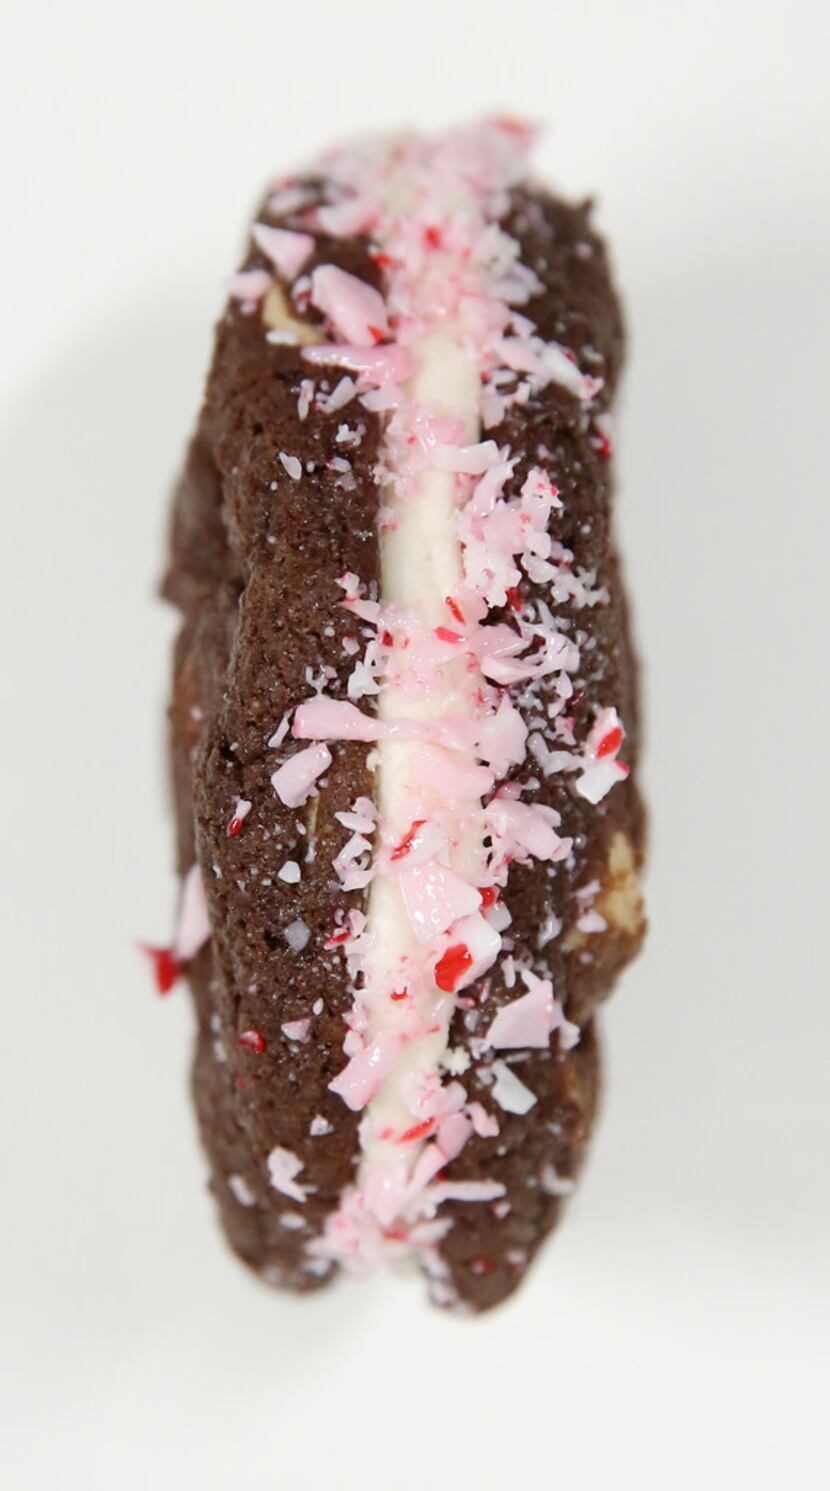 Sarah Coffey earned second place in the Boozy category for her Spiked Peppermint Mocha Sammies.